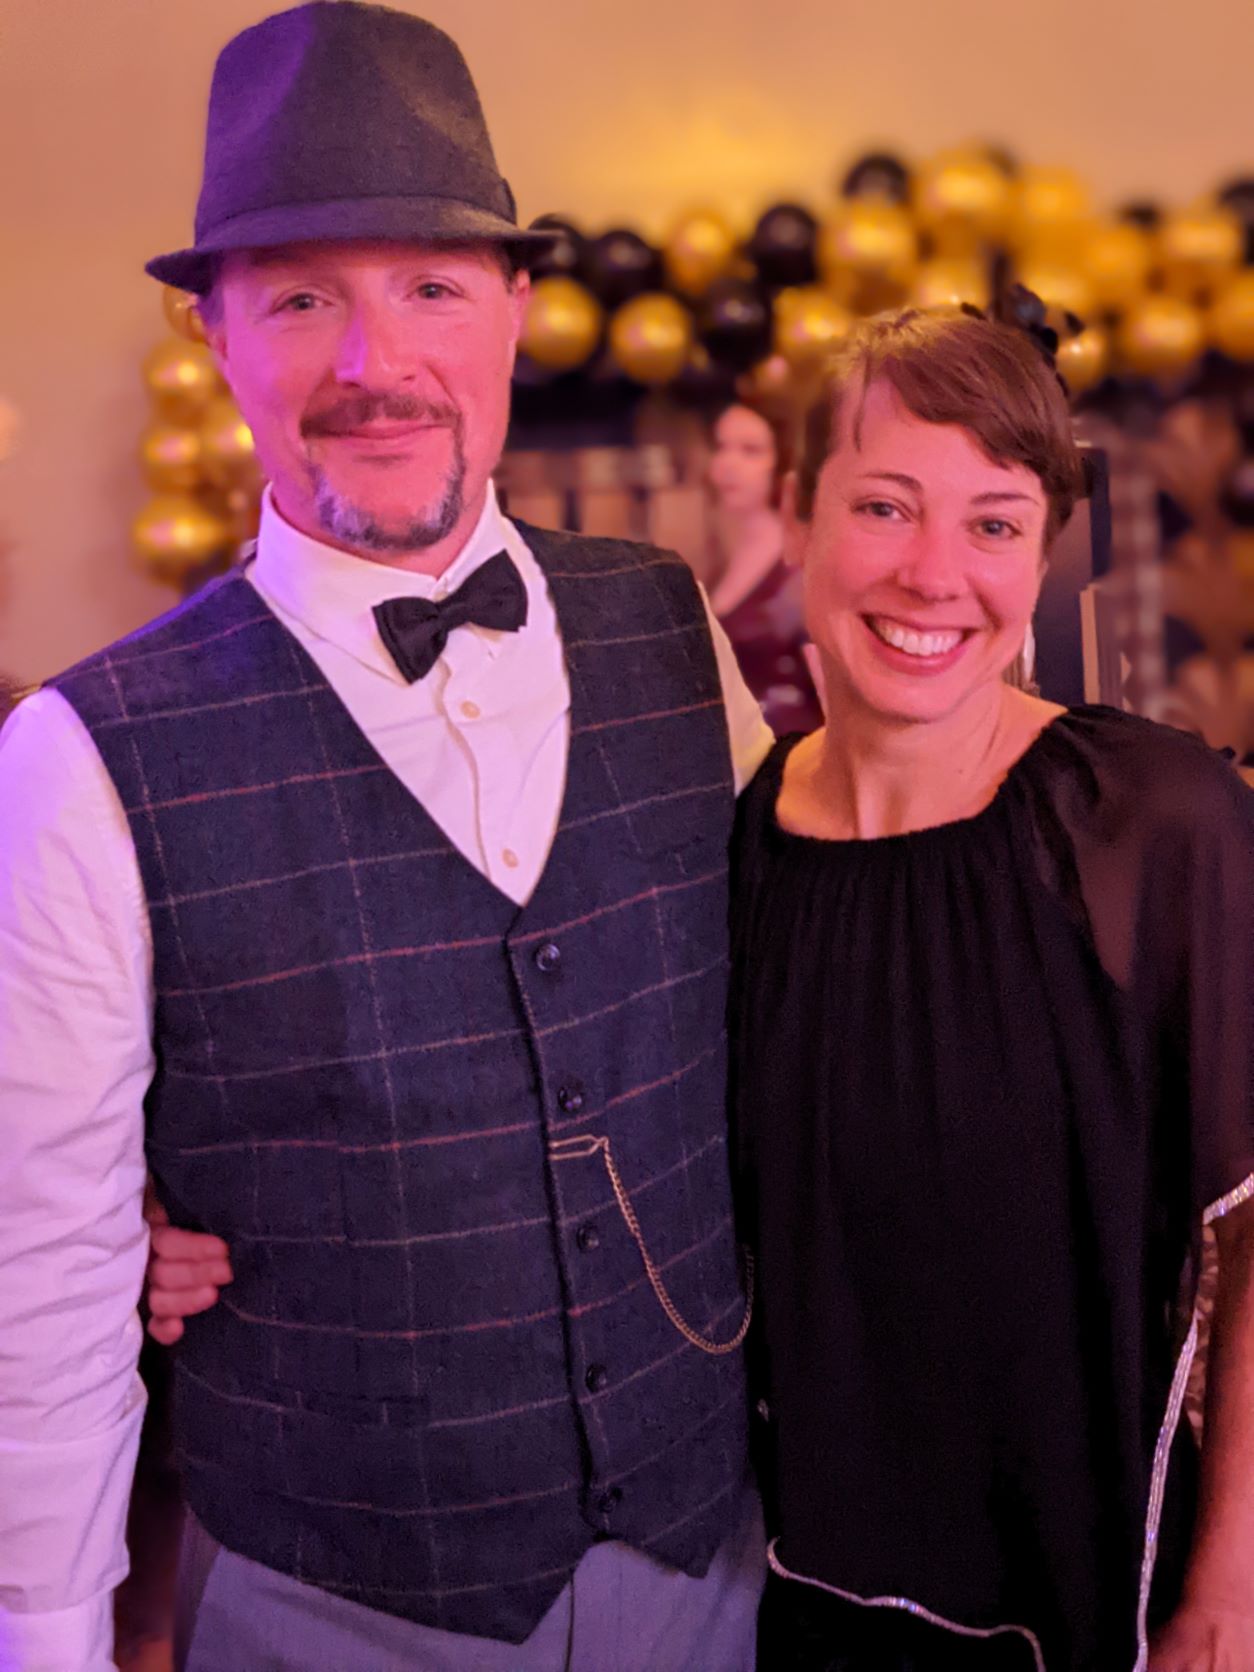 Couple dressed up in 20's party attire